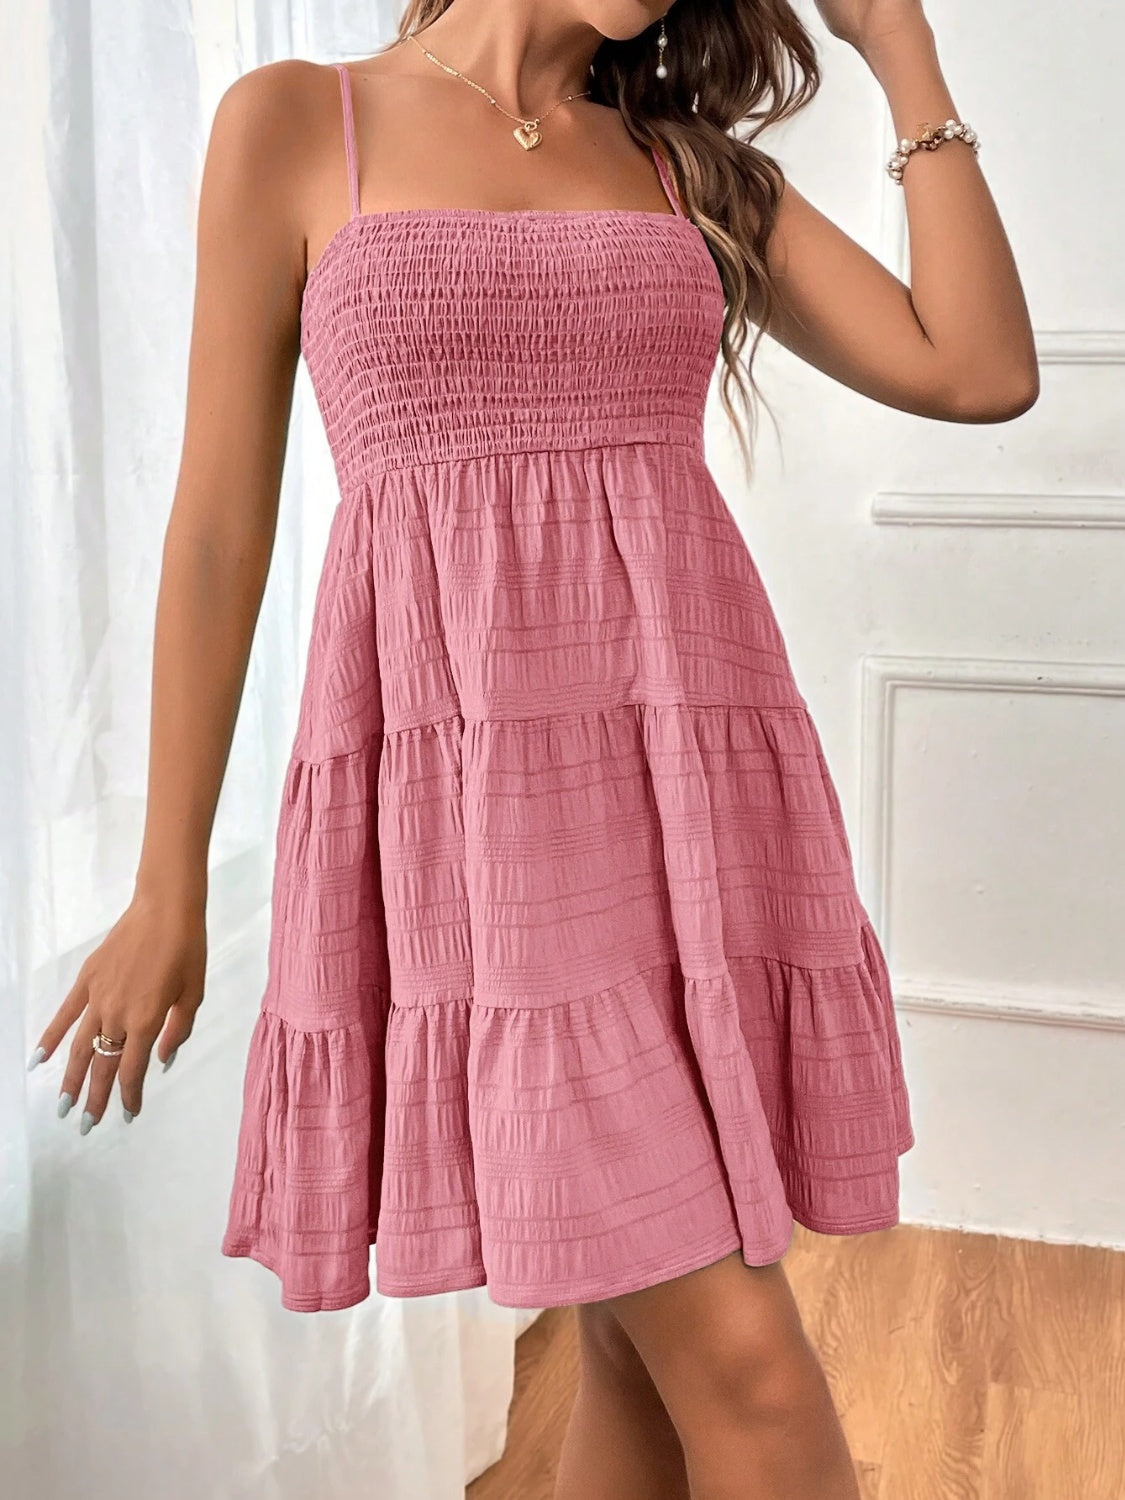 Chic sleeveless mini dress with a smocked bodice and tiered skirt, perfect for summer. Available in 8 colors for any occasion.